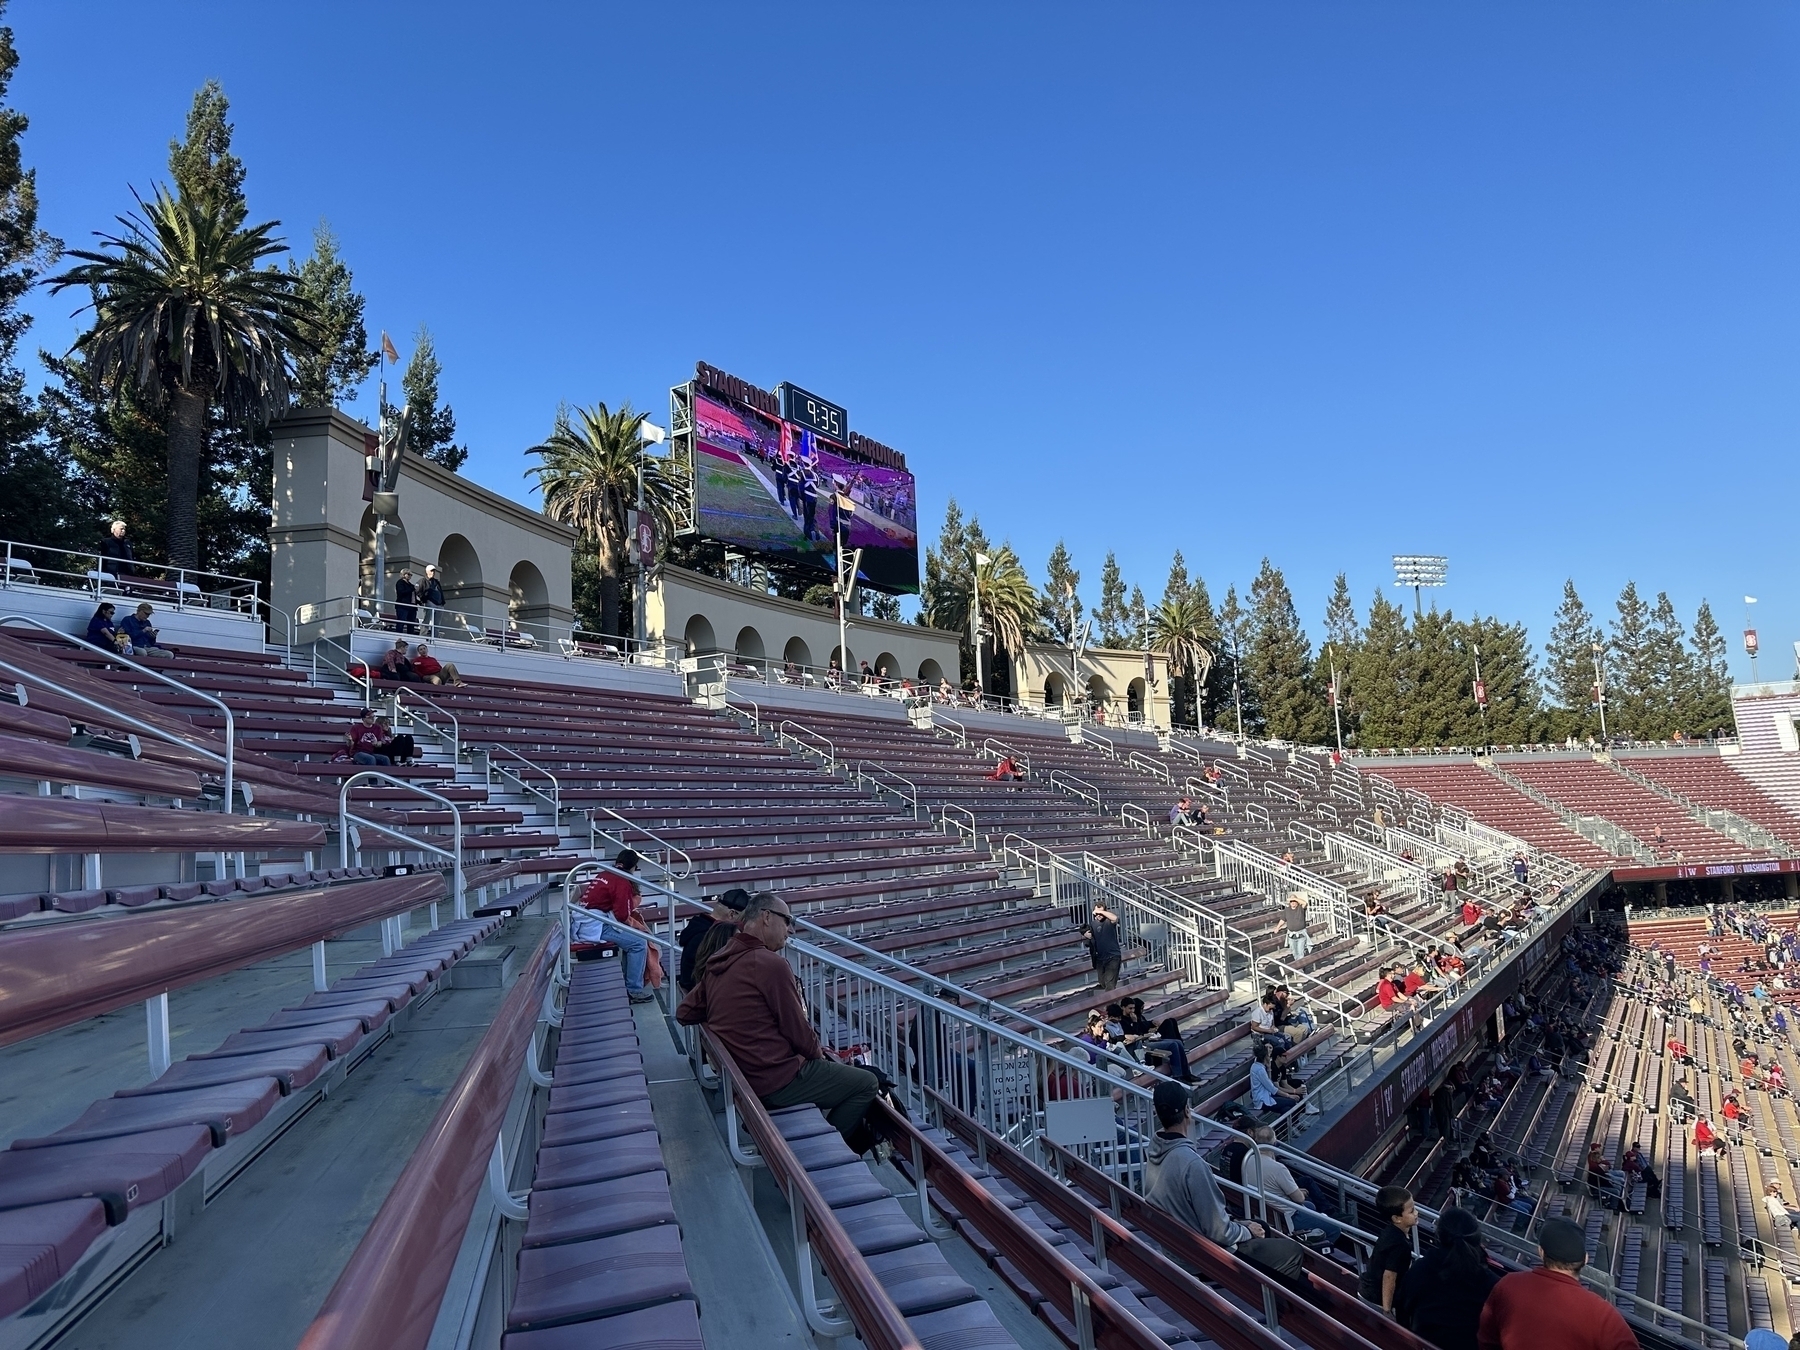 Scoreboard and trees at Stanford Stadium